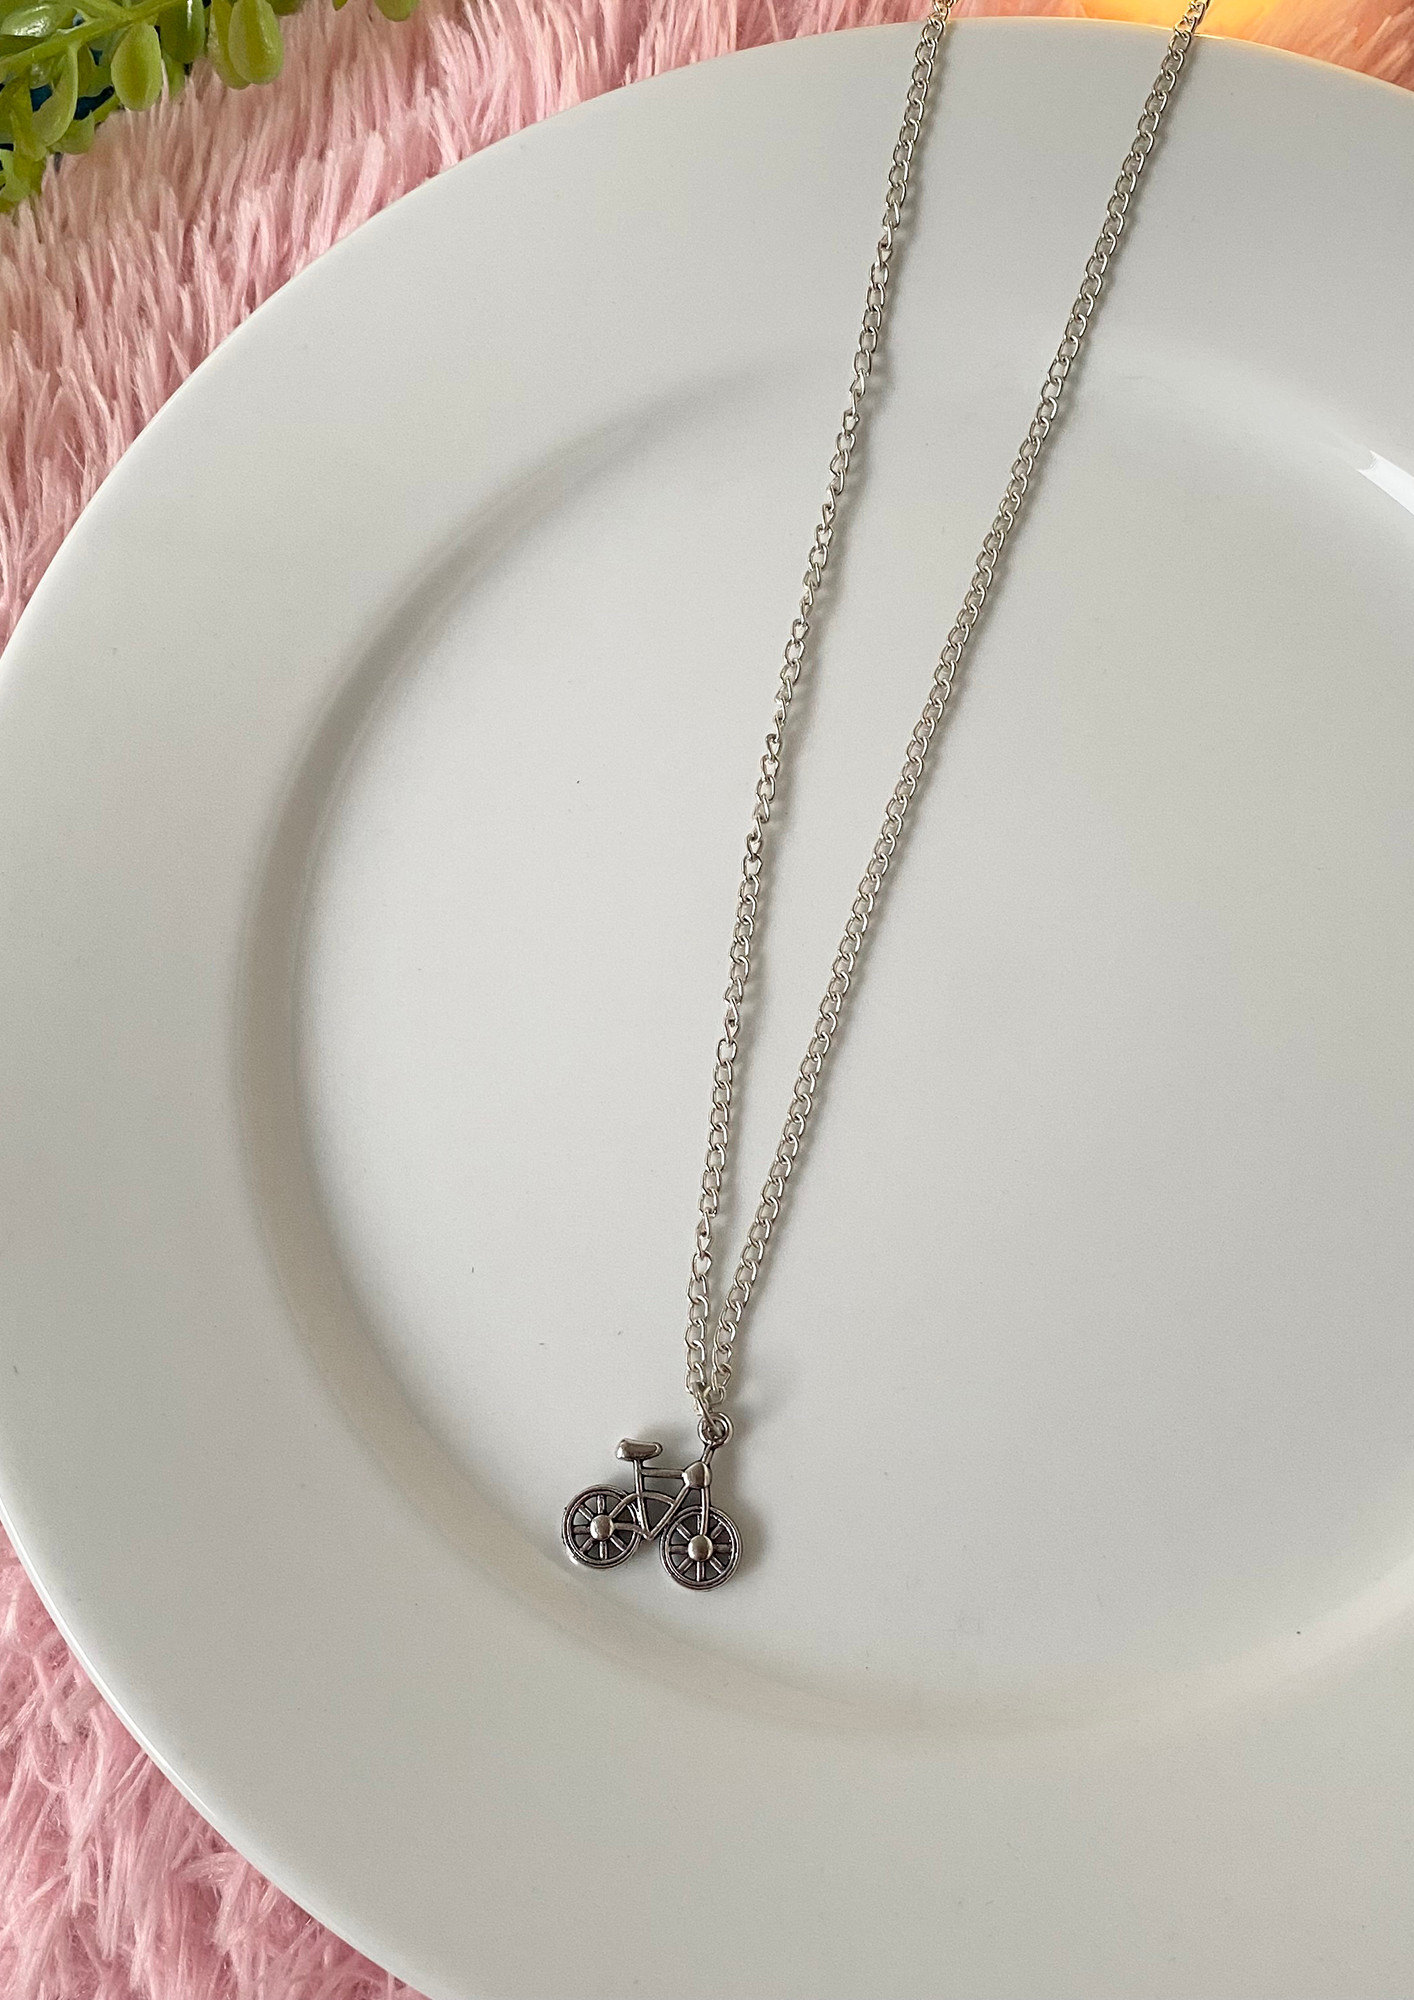 DAINTY BICYCLE CHARM NECKLACE